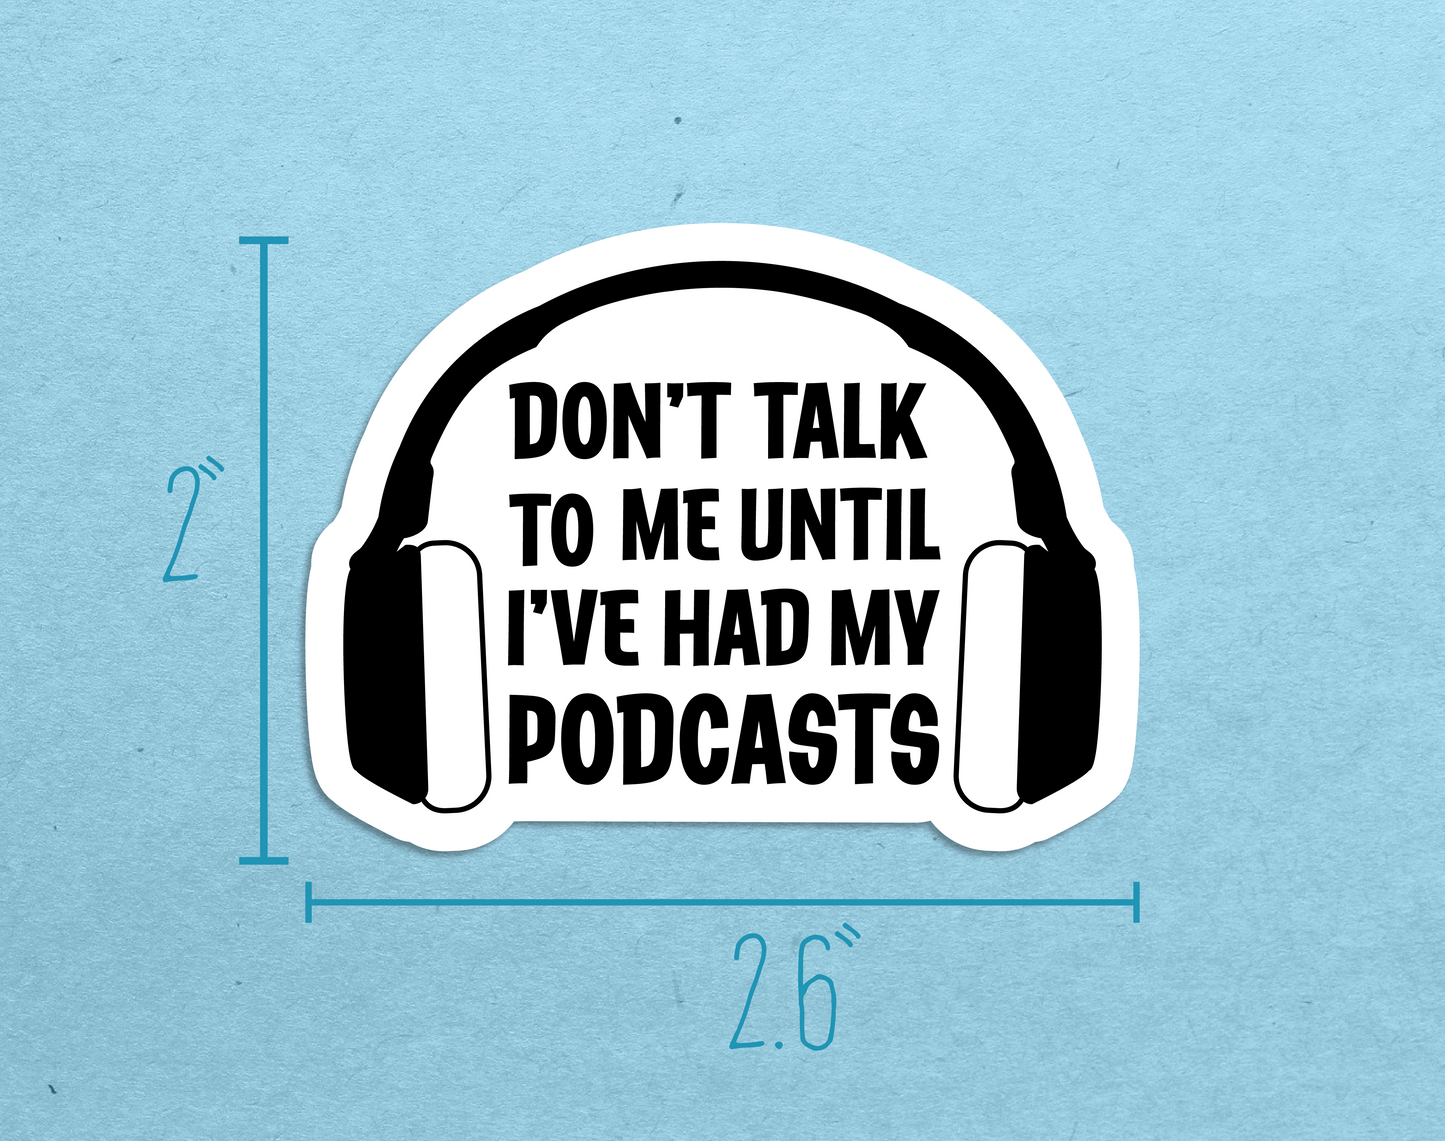 A die-cut sticker featuring headphones and text reading "Don't talk to me until I've had my podcasts" with measurements showing a height of 2" and a width of 2.6"